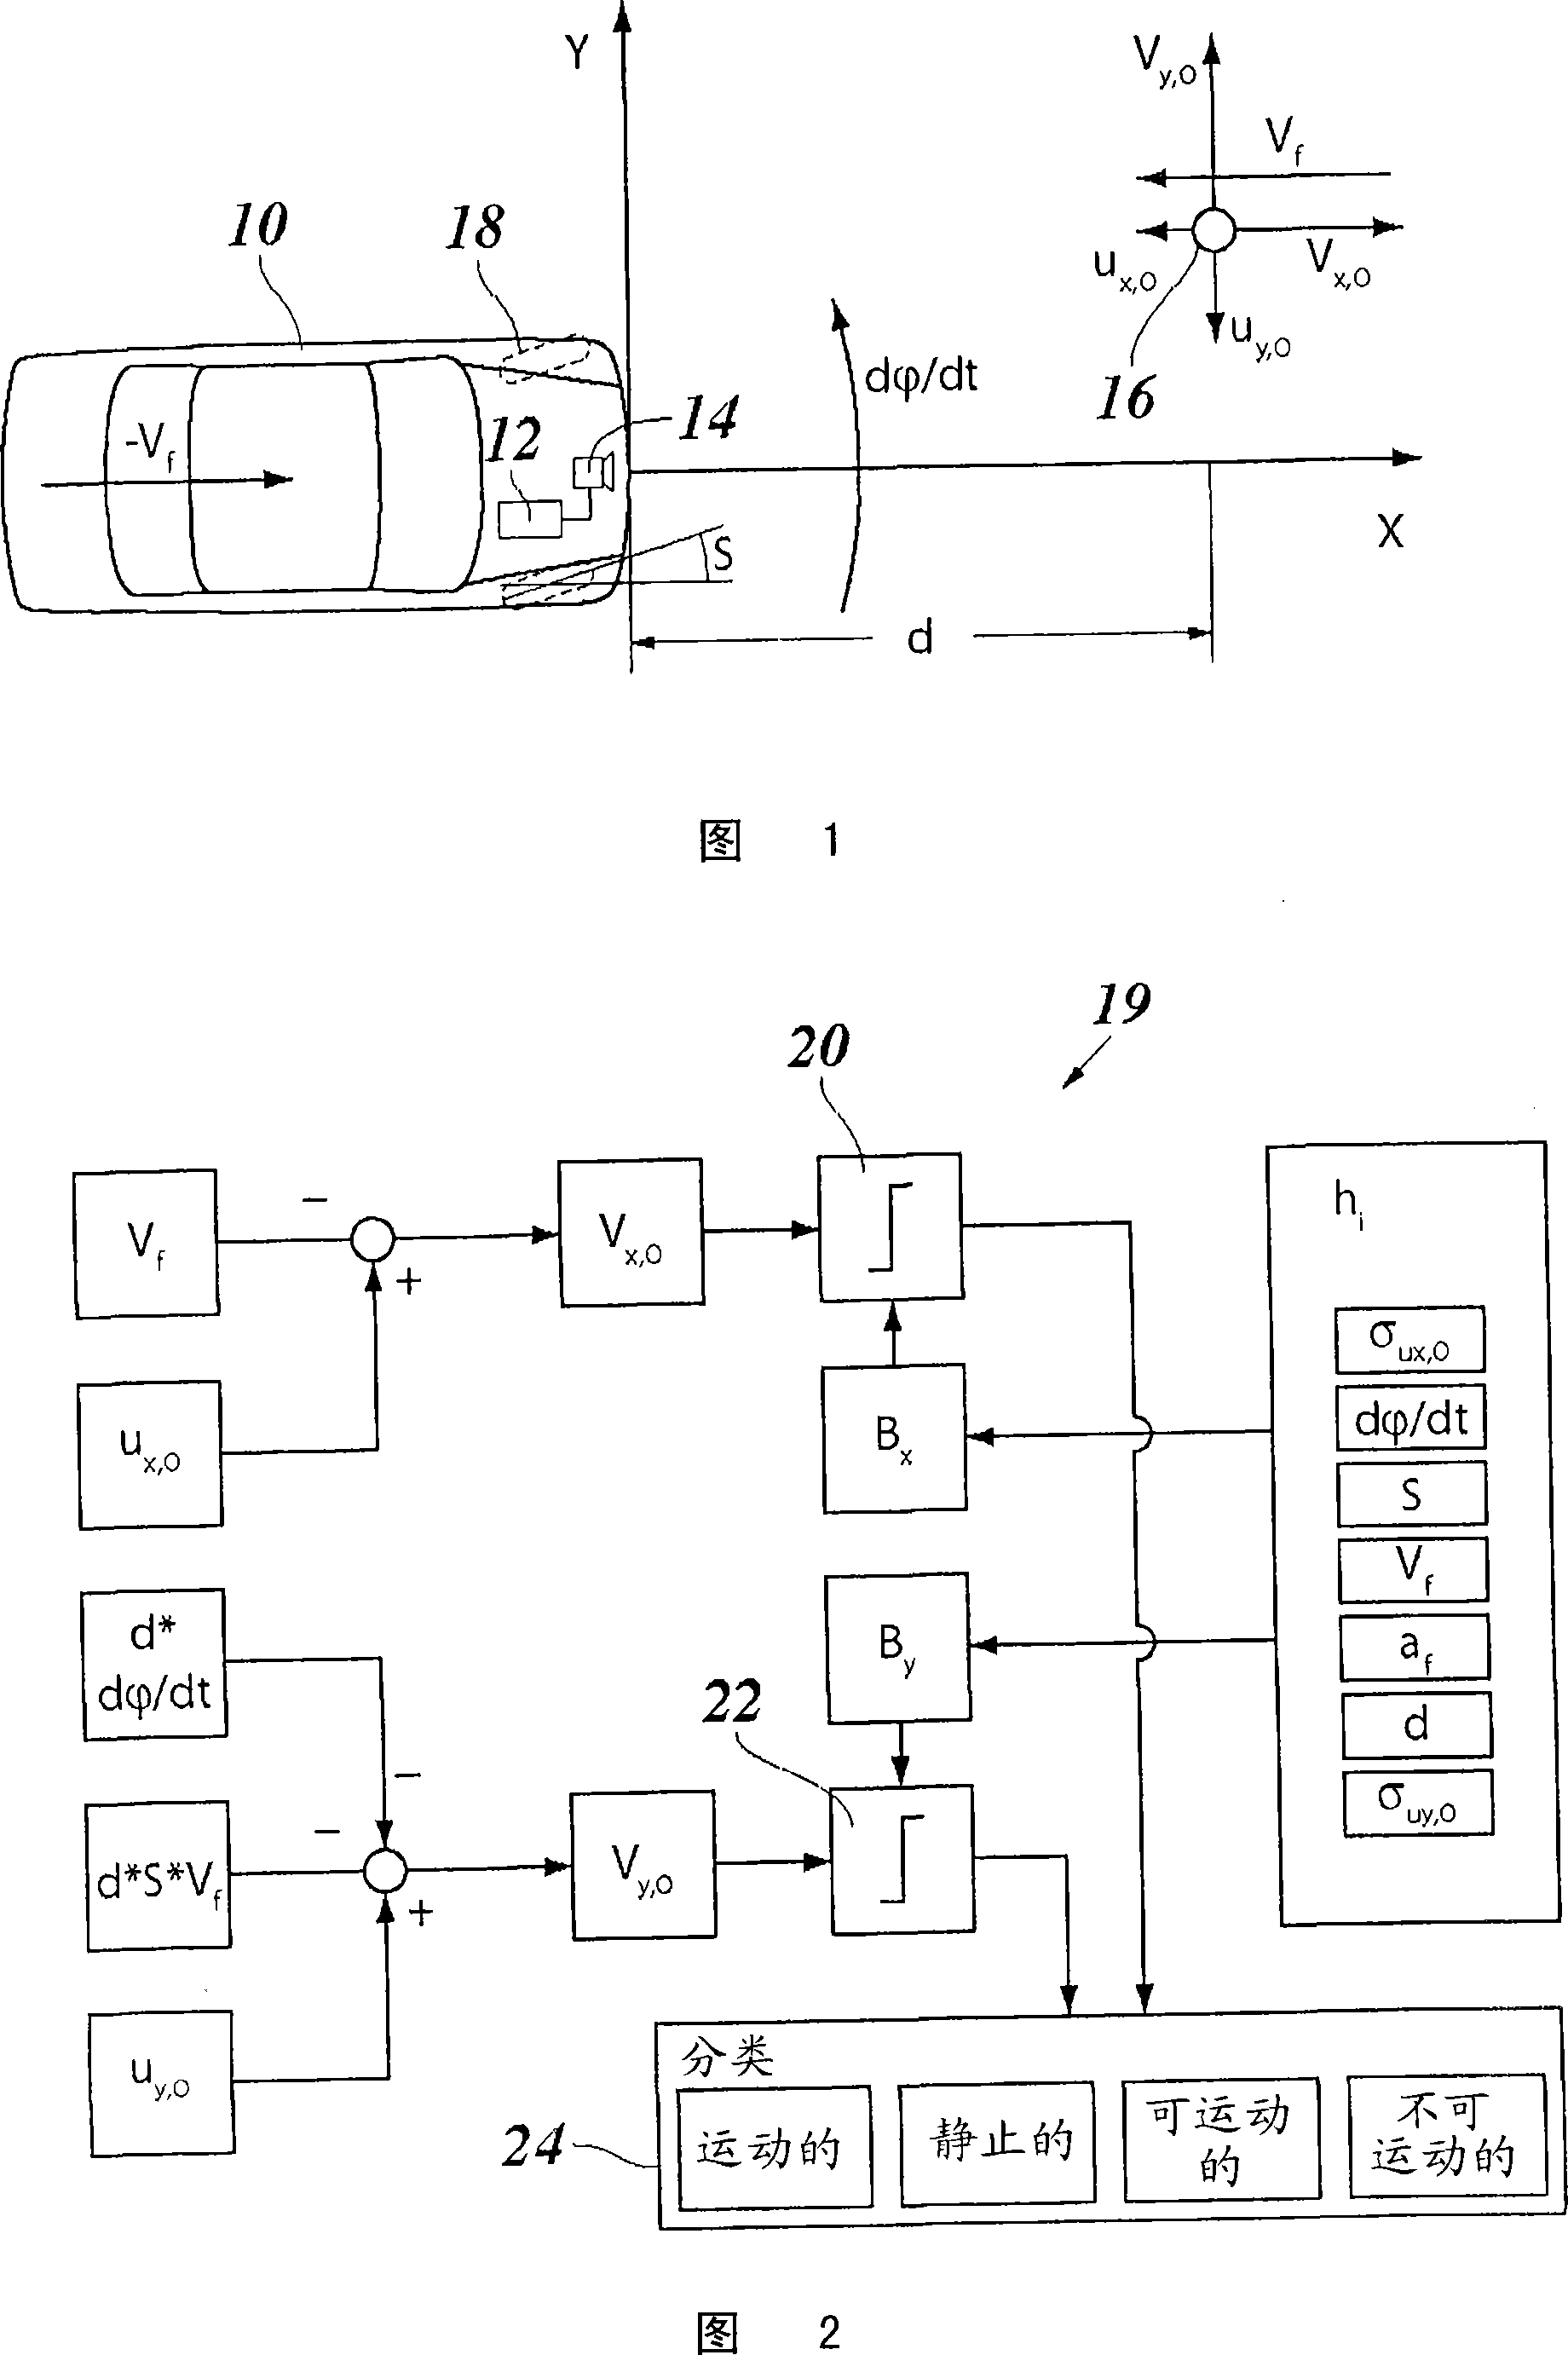 Driver assistance system comprising a device for recognizing non-moving objects